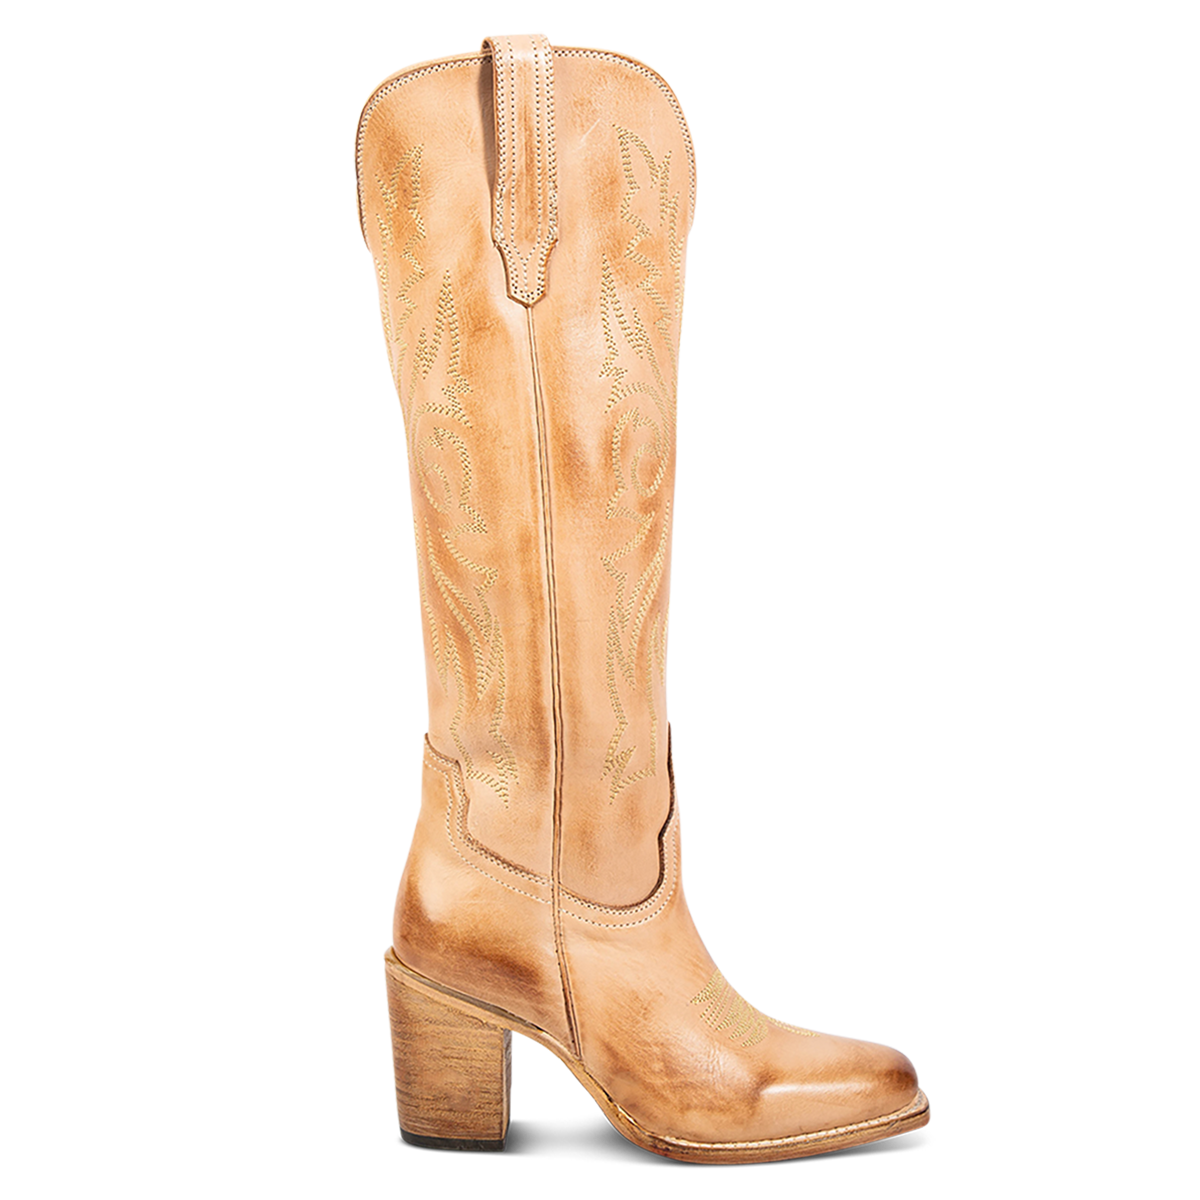 FREEBIRD women's Panama beige leather elevated cowboy boot with shaft stitch detailing, inside working brass zipper, stacked heel and a snip toe